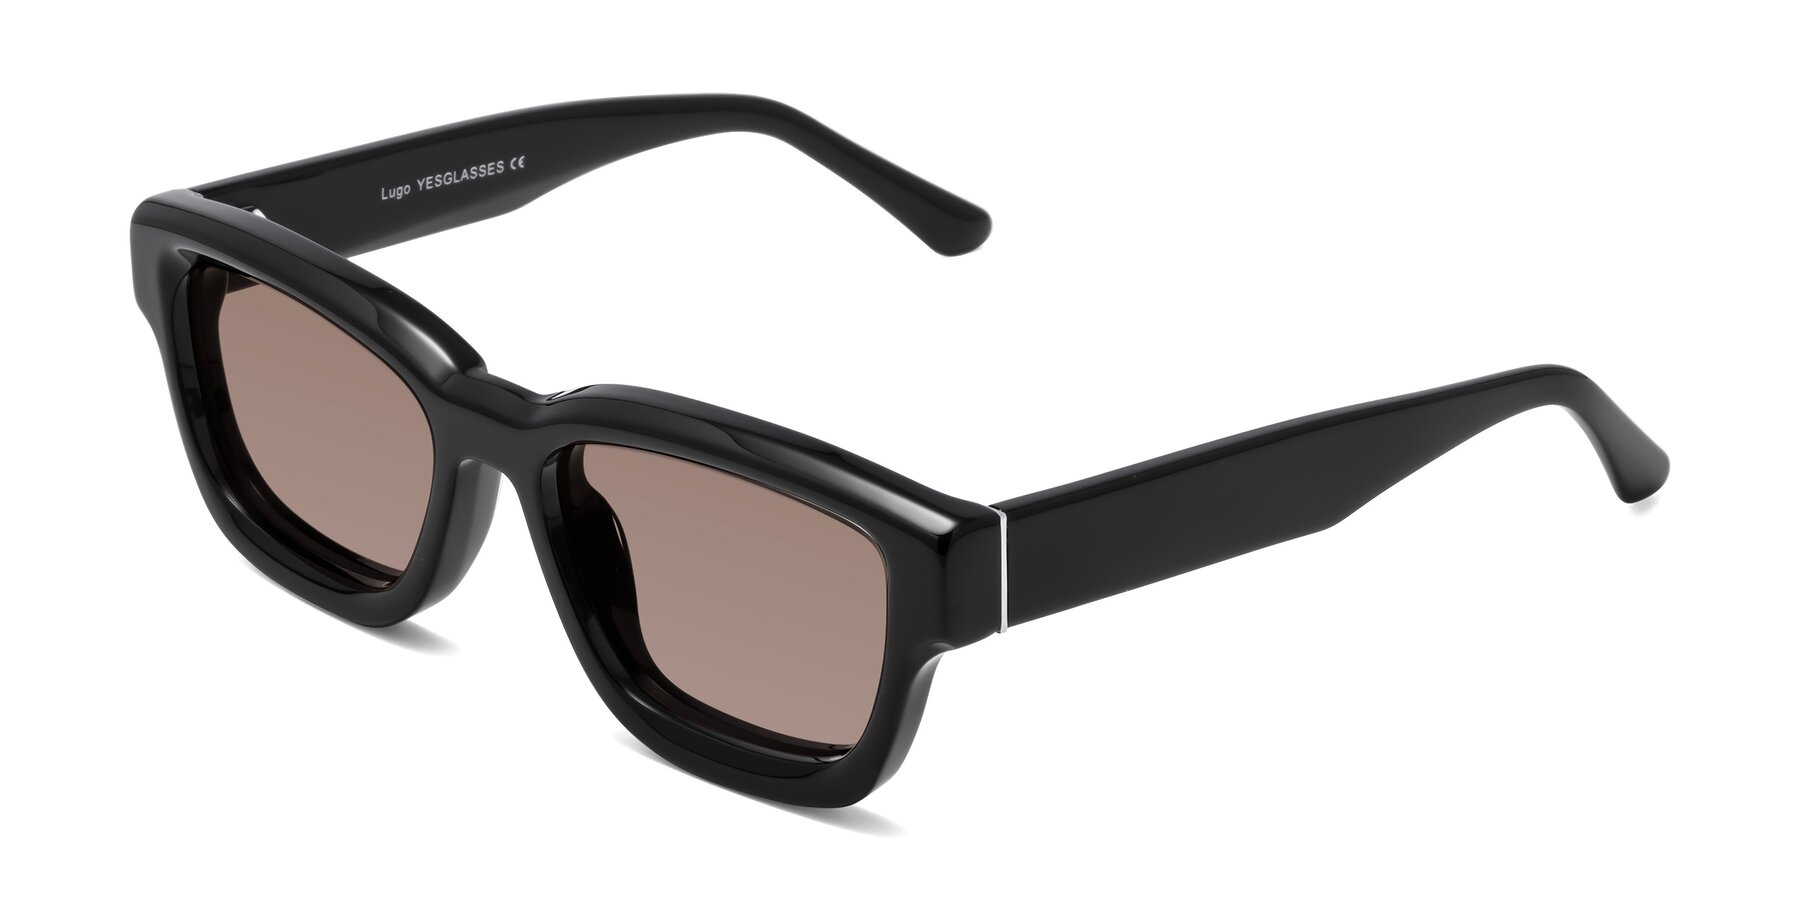 Angle of Lugo in Black with Medium Brown Tinted Lenses